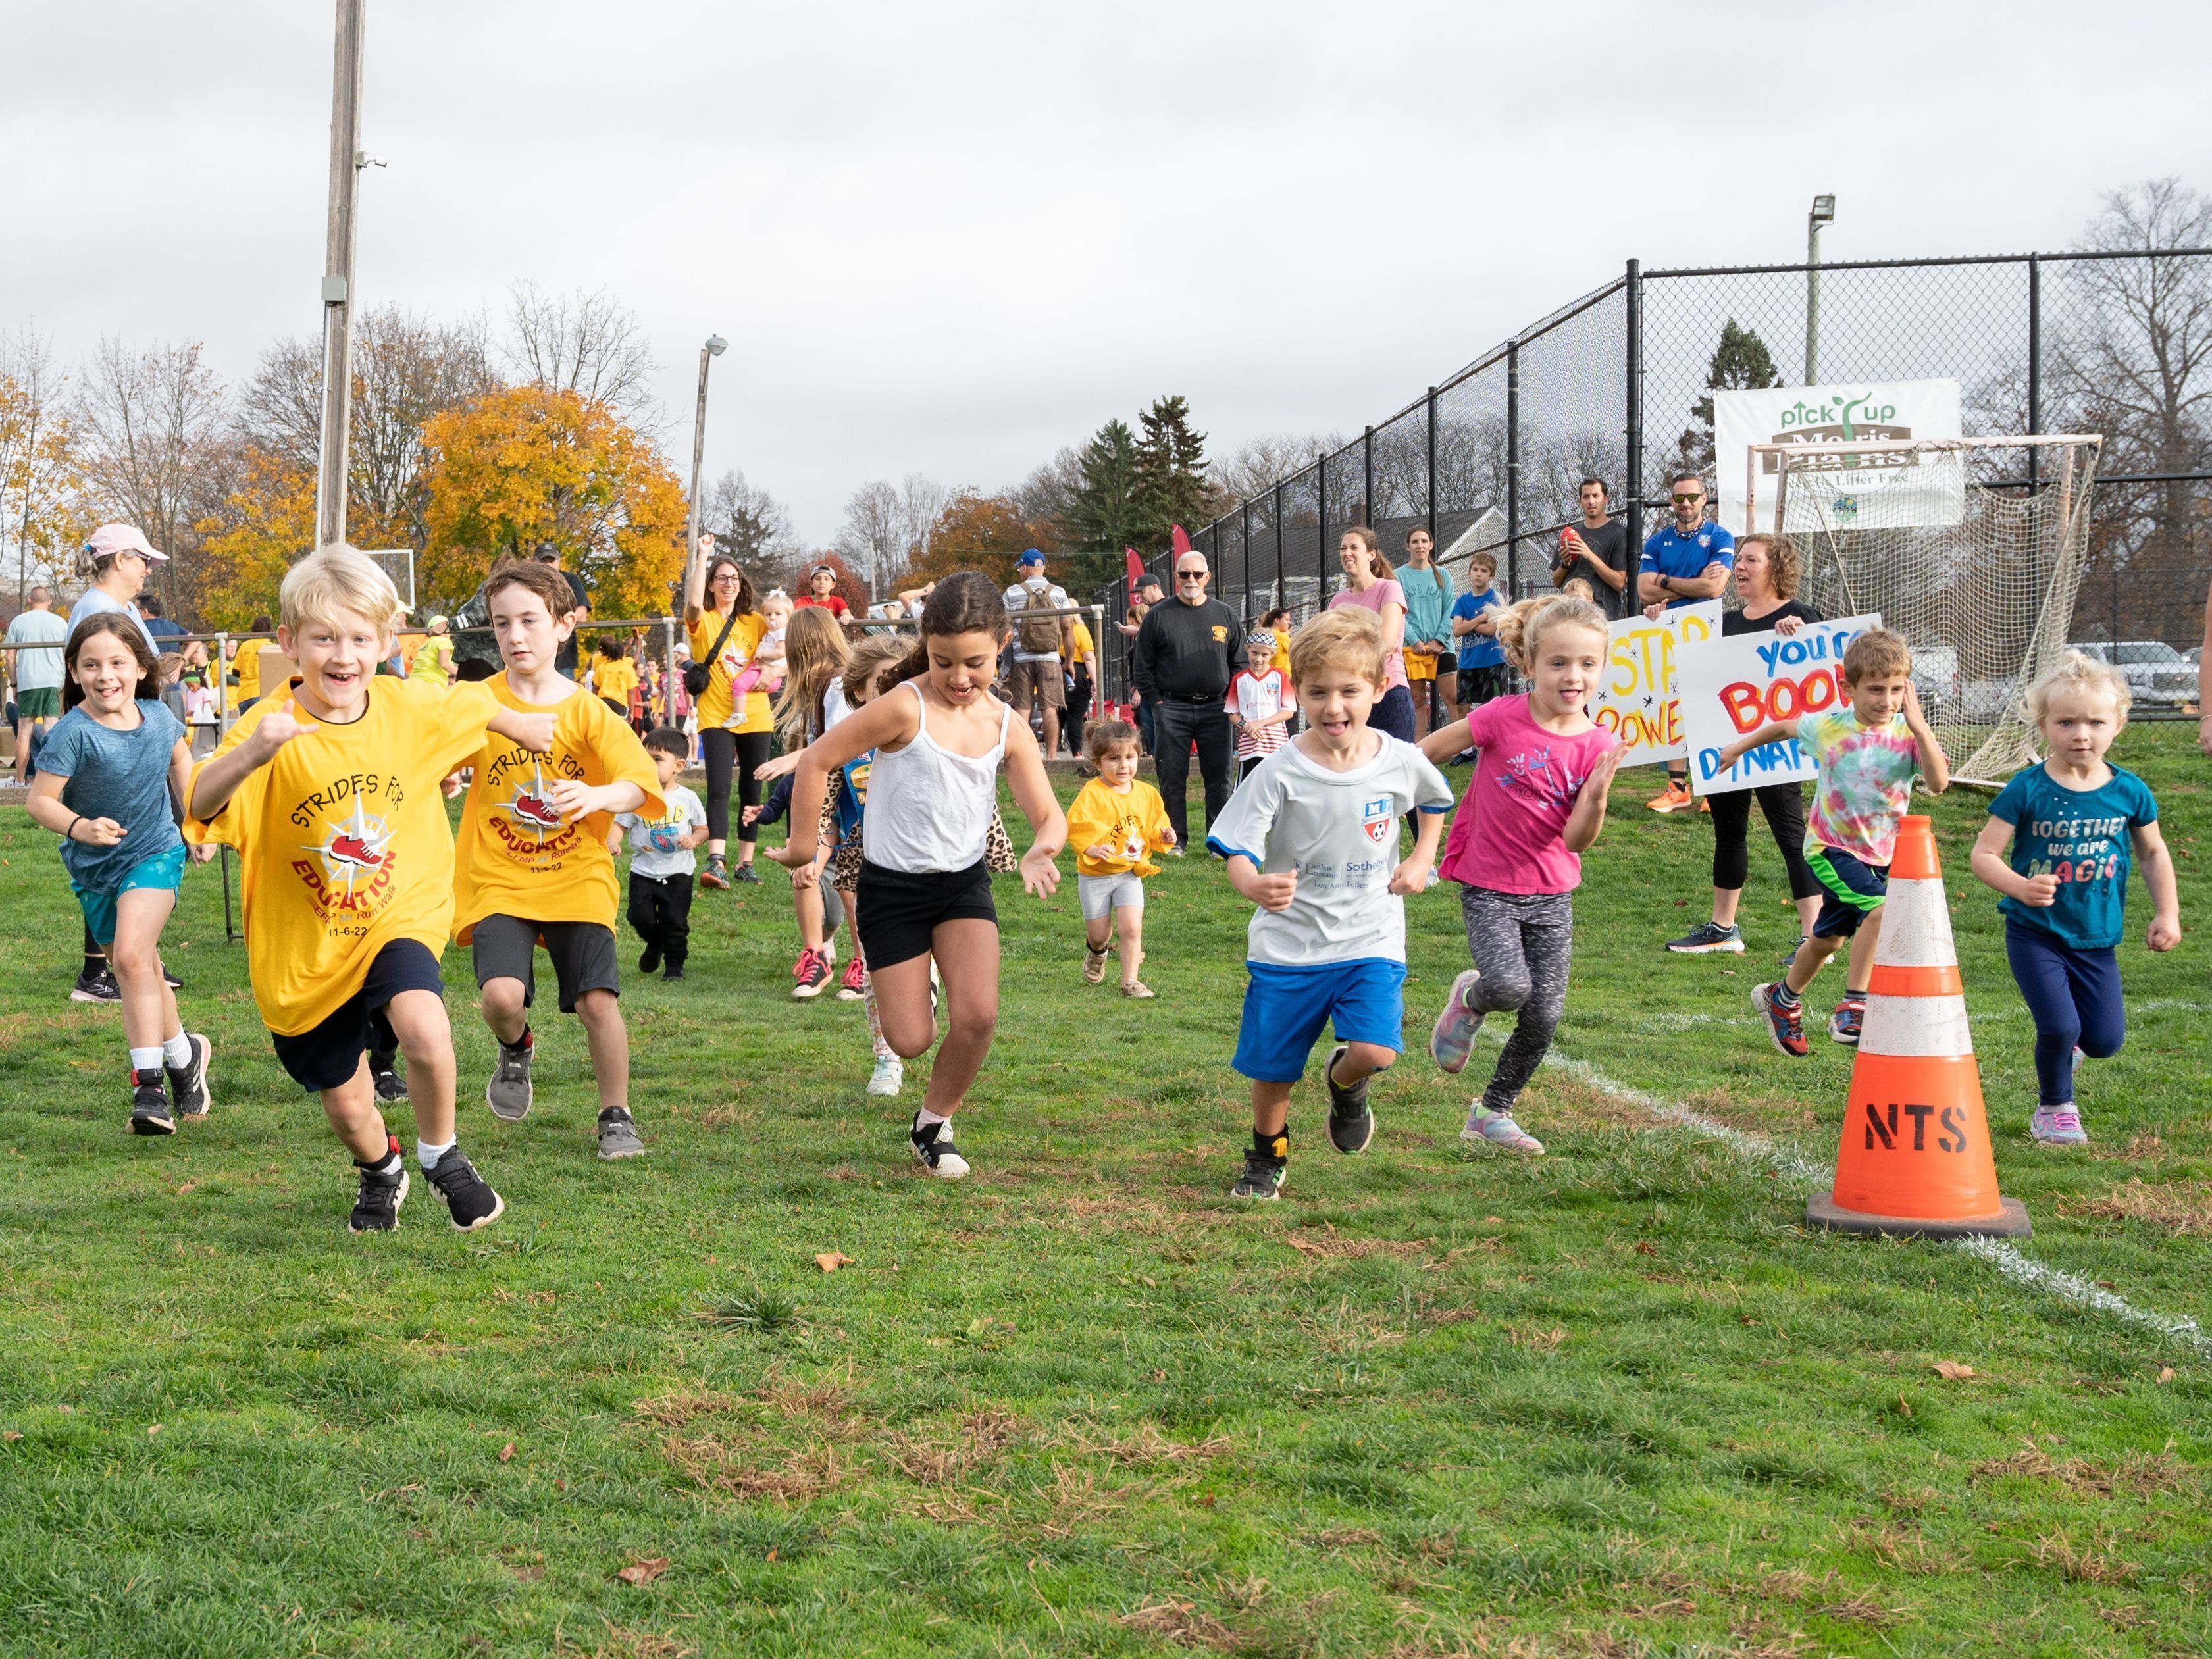 Kids' Fun Run at the Strides for Education 5K